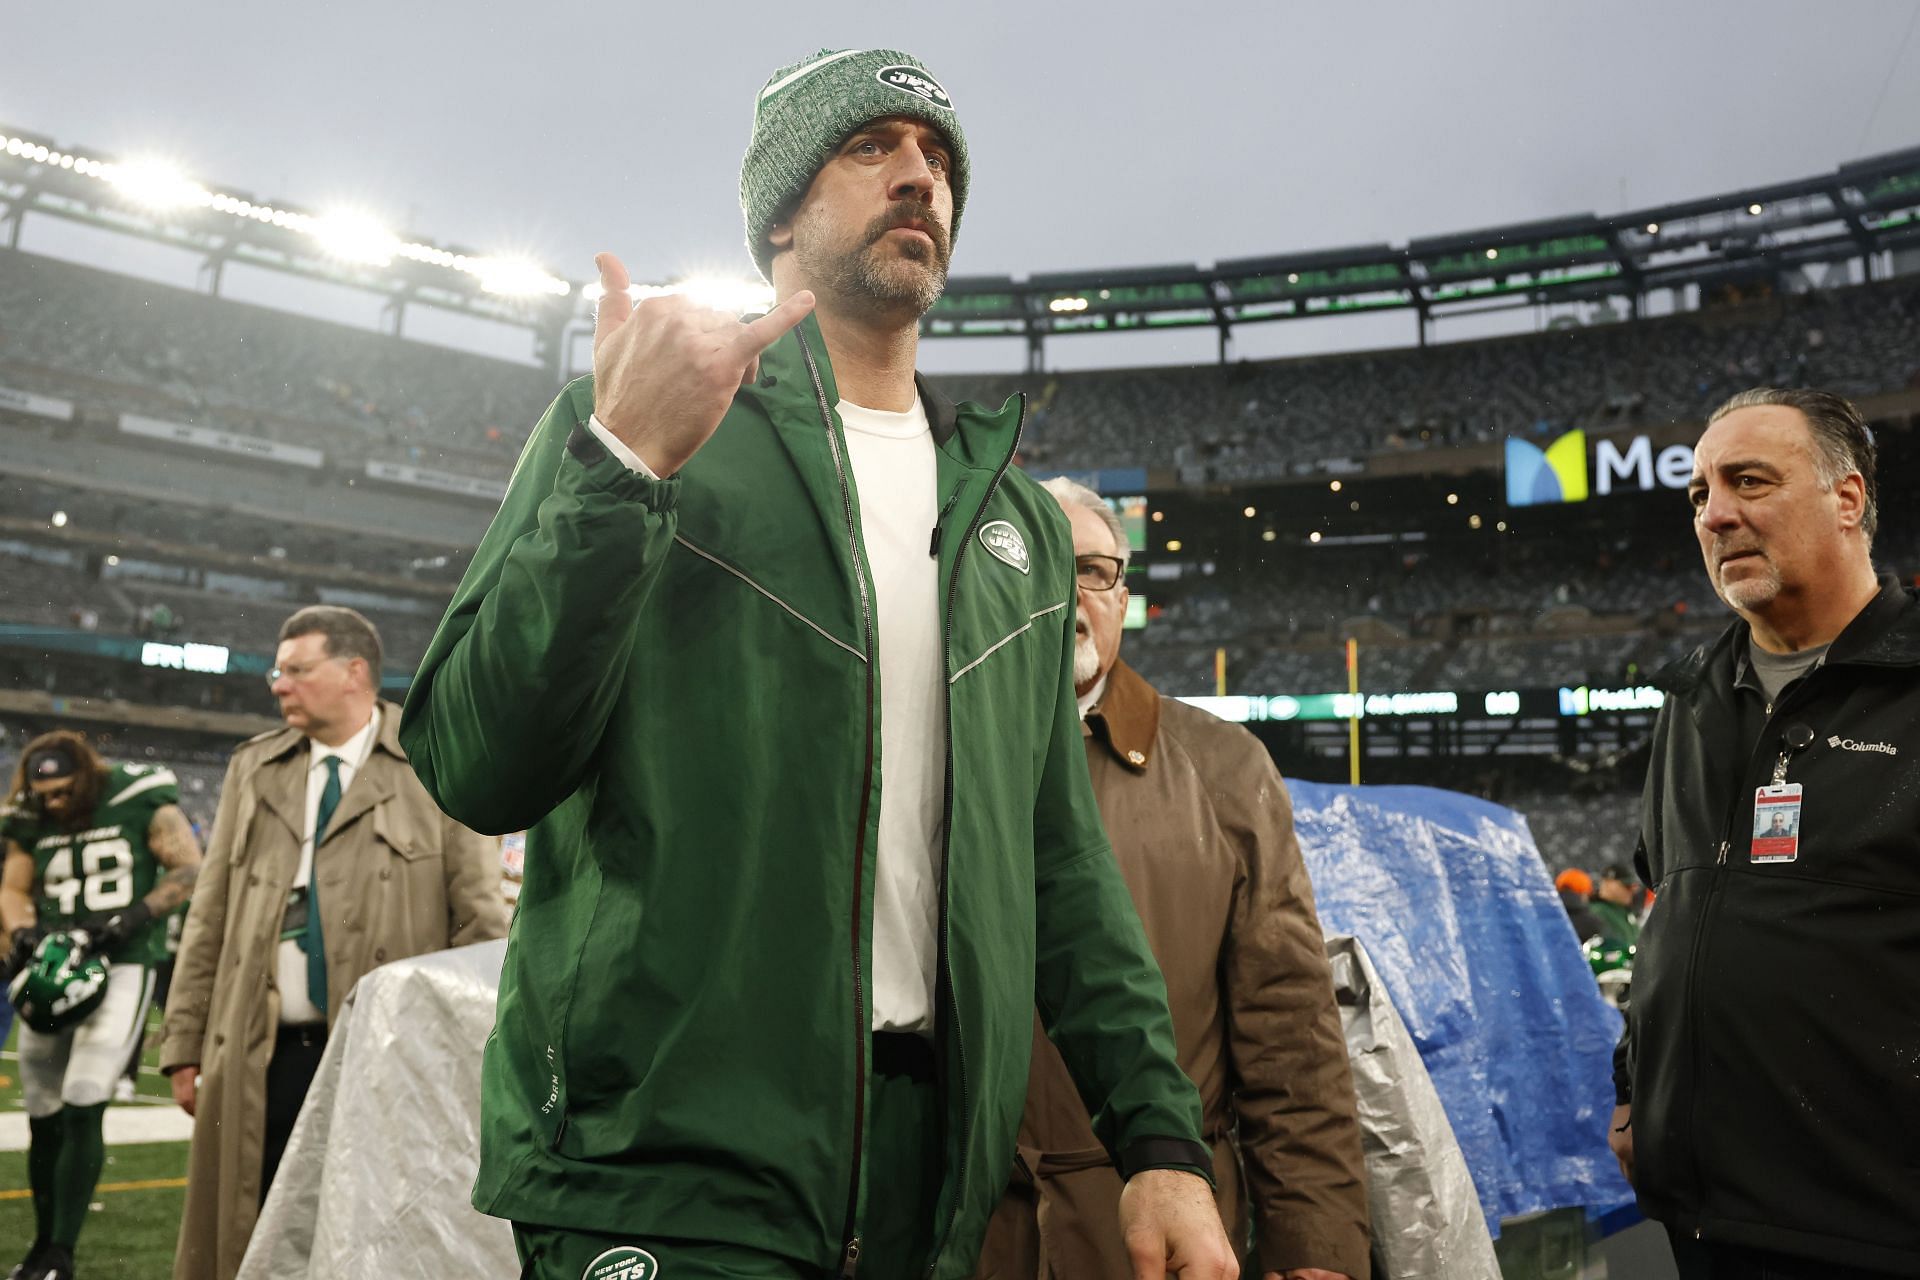 Aaron Rodgers at Houston Texans vs. the New York Jets